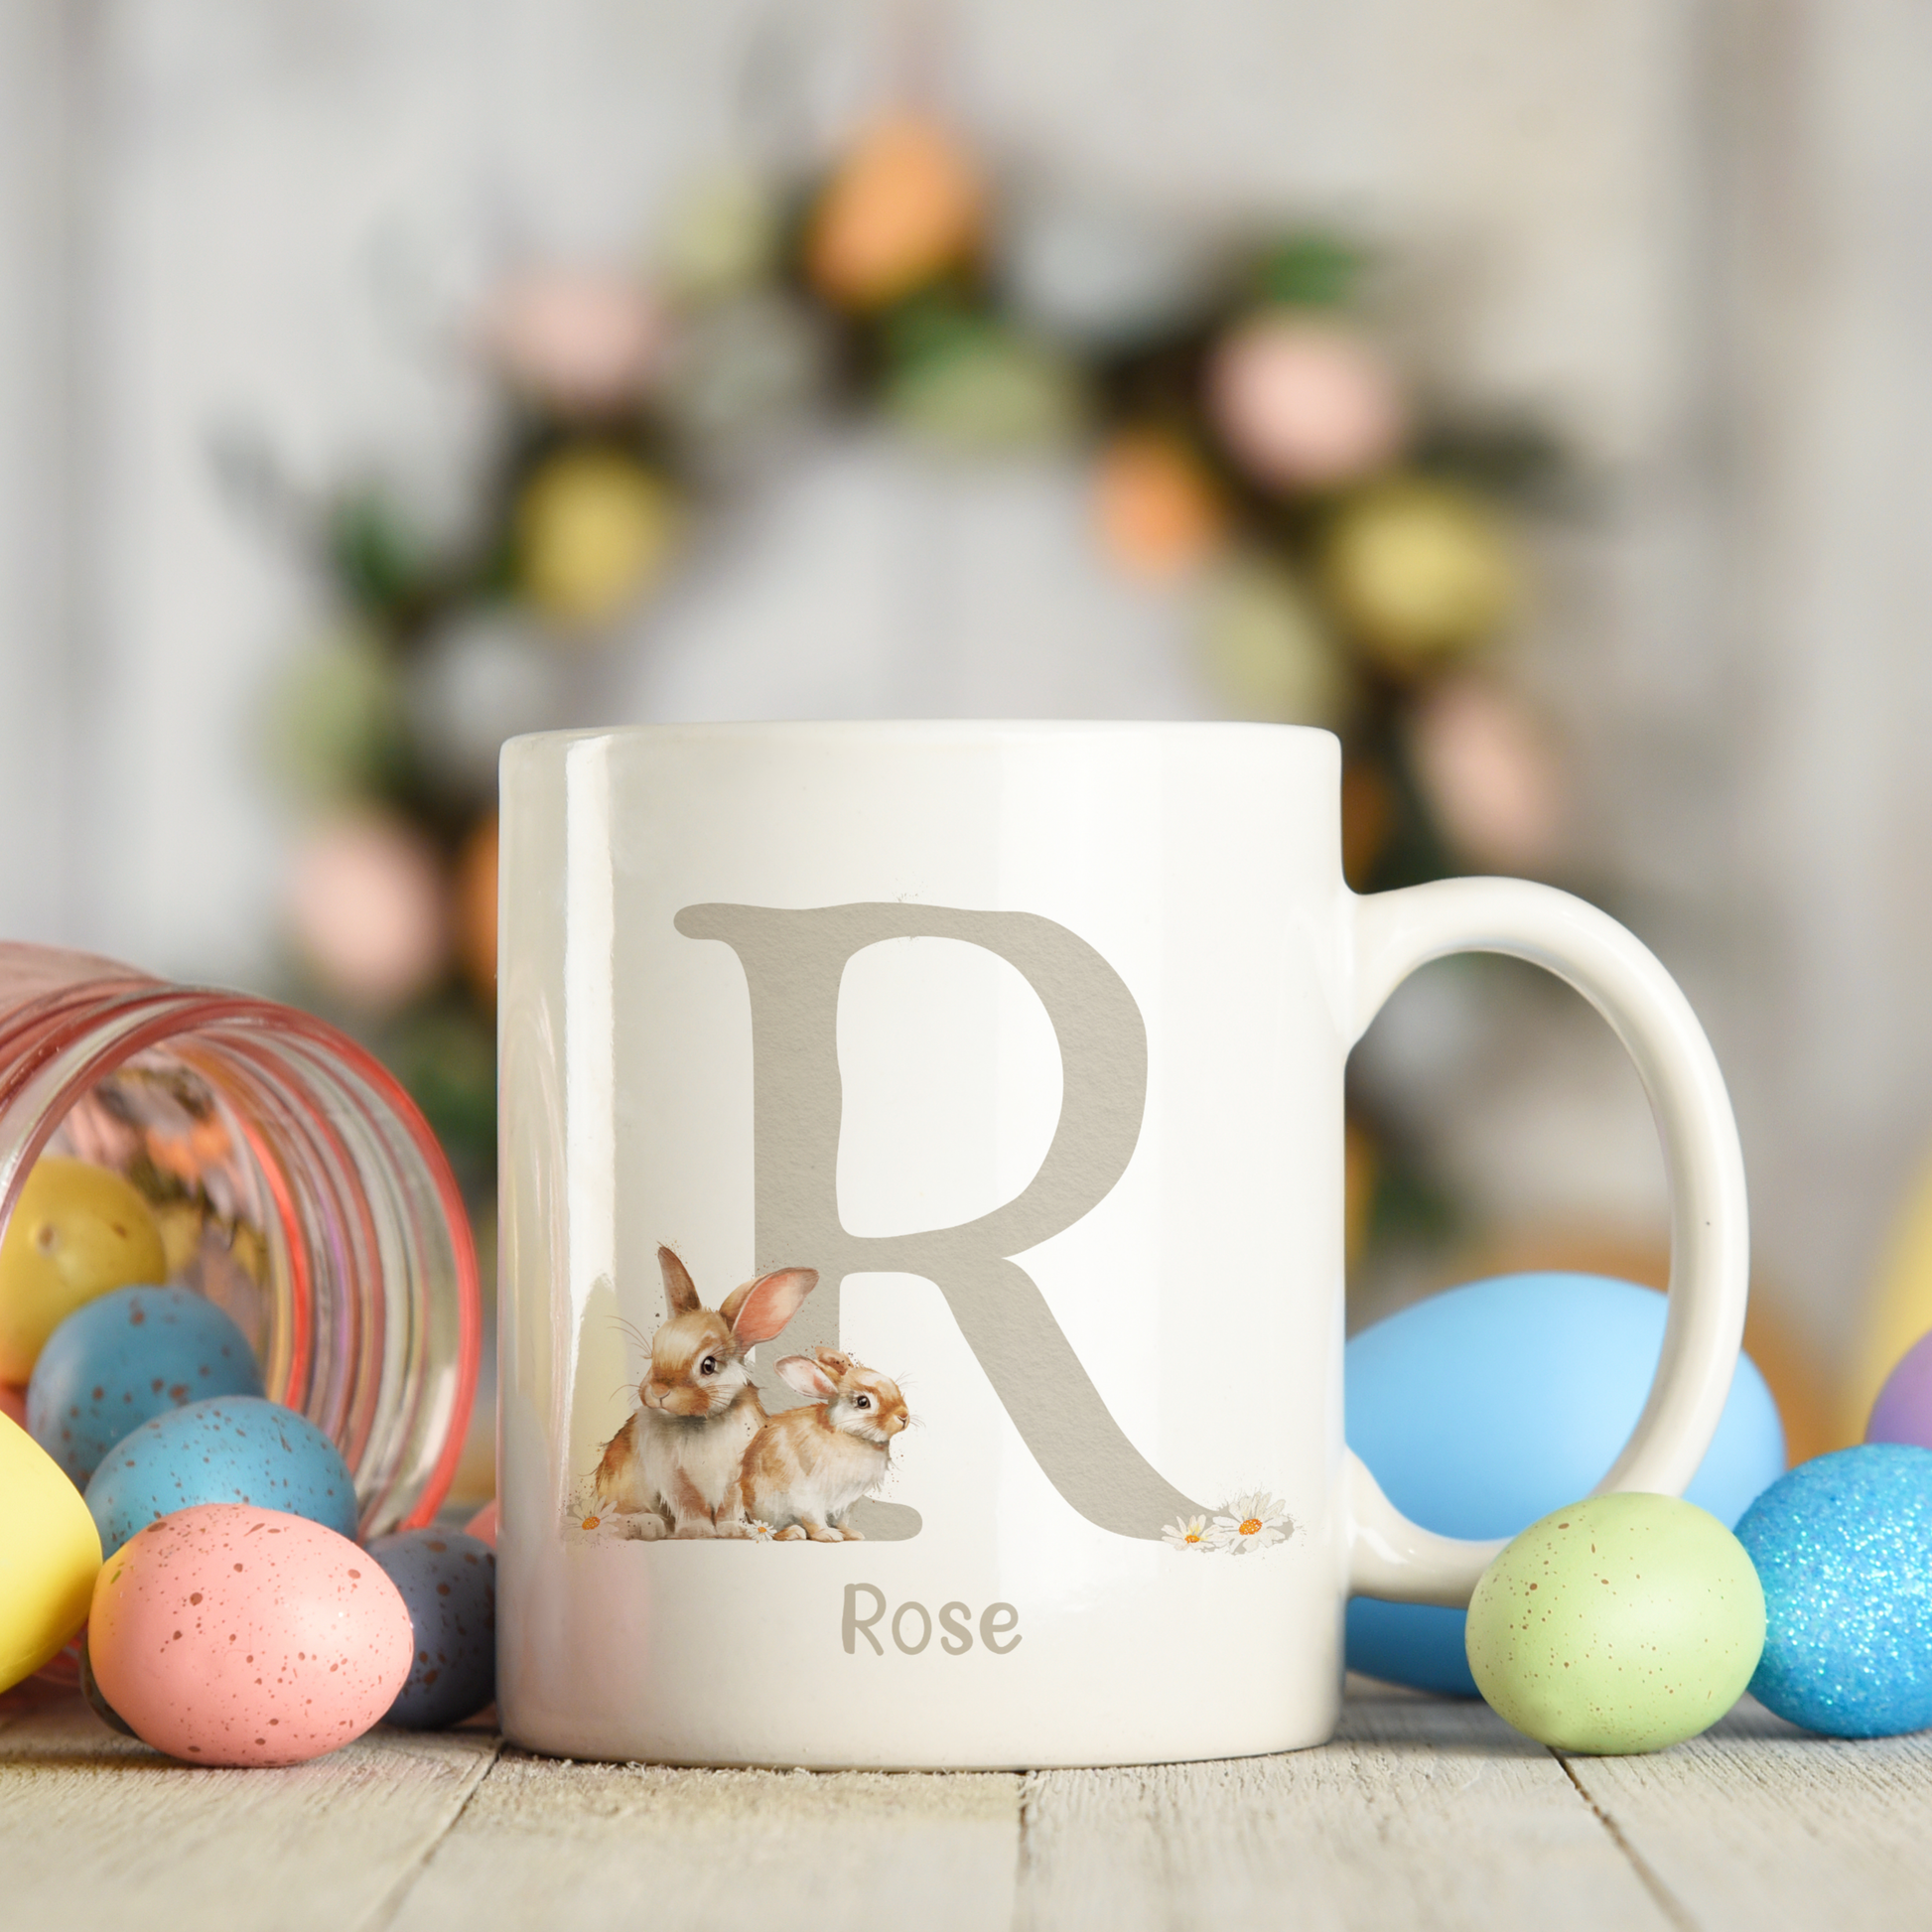 Ceramic mug featuring an alphabet personalised design with a cute bunny rabbit